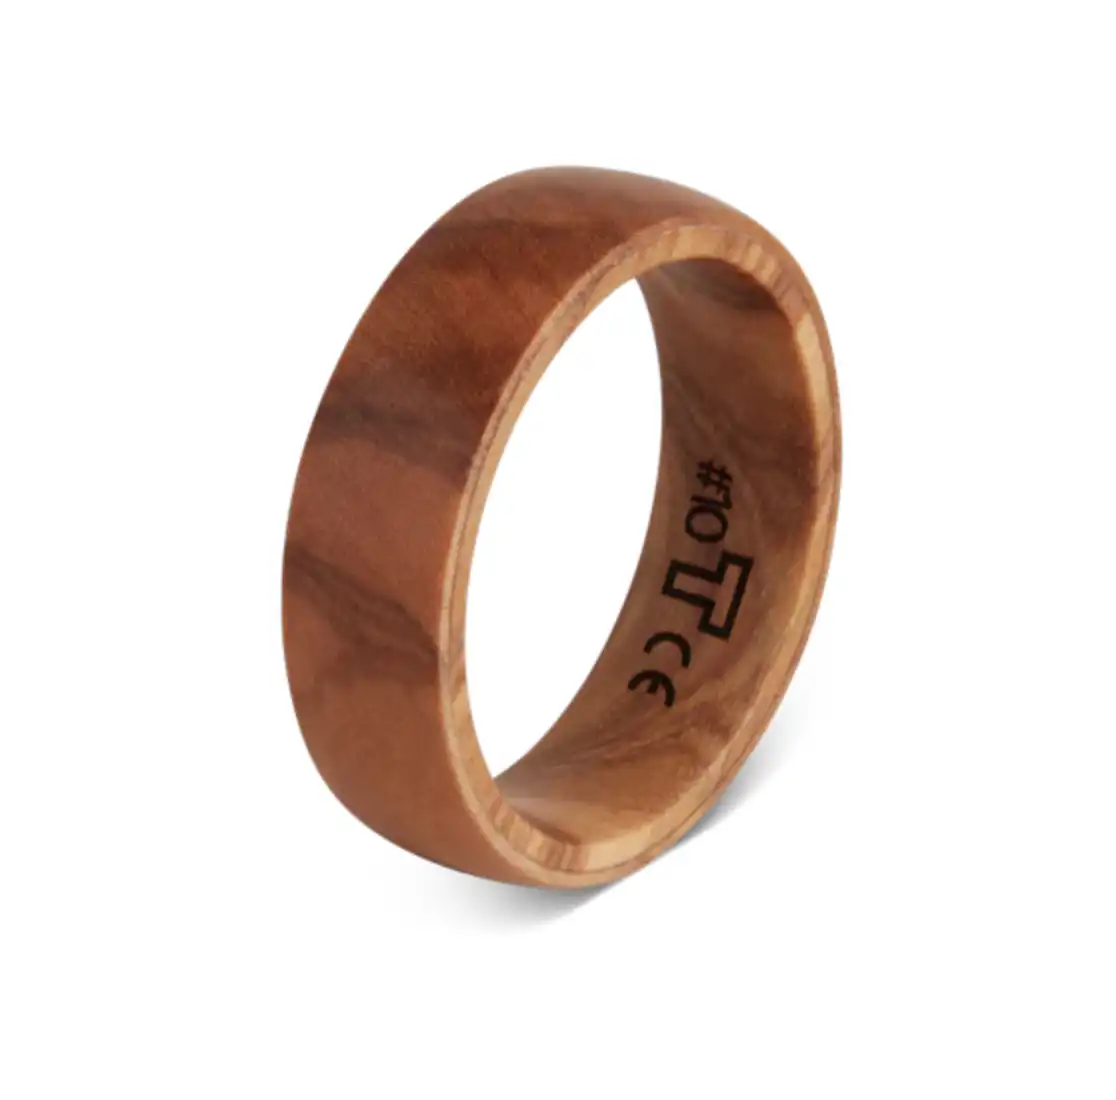 Tapster Payment Ring - Oak